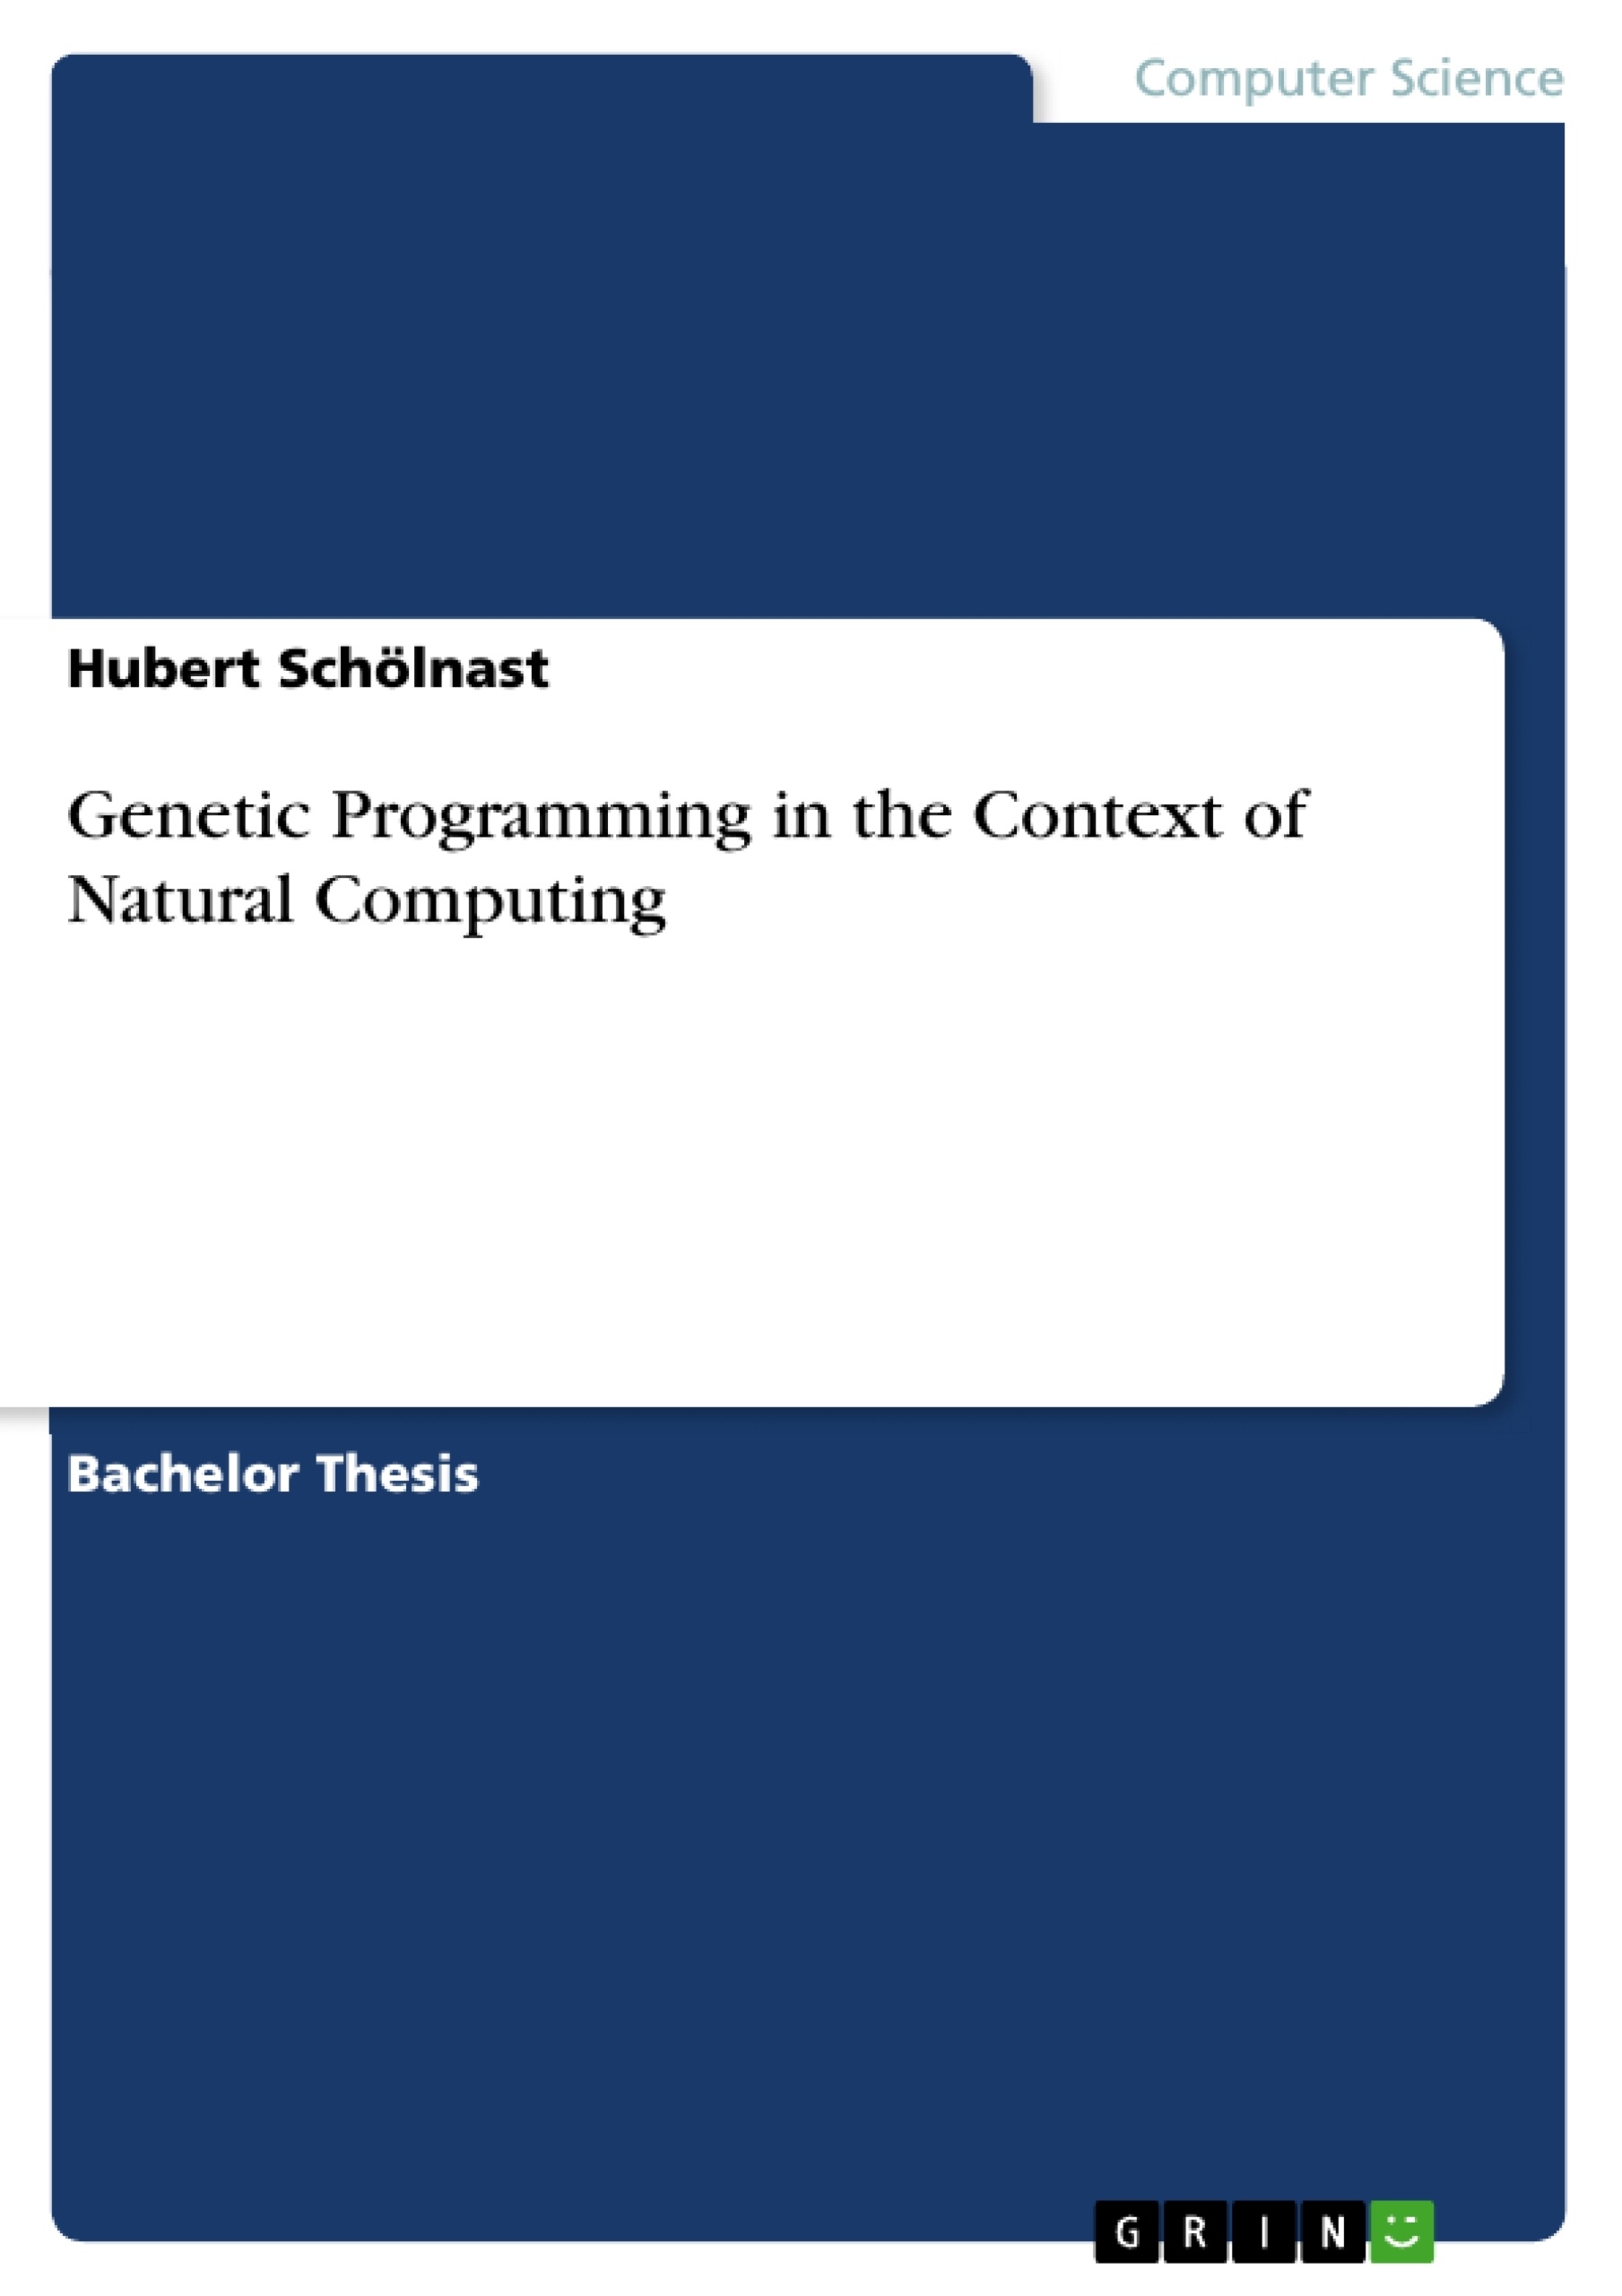 Title: Genetic Programming in the Context of Natural Computing